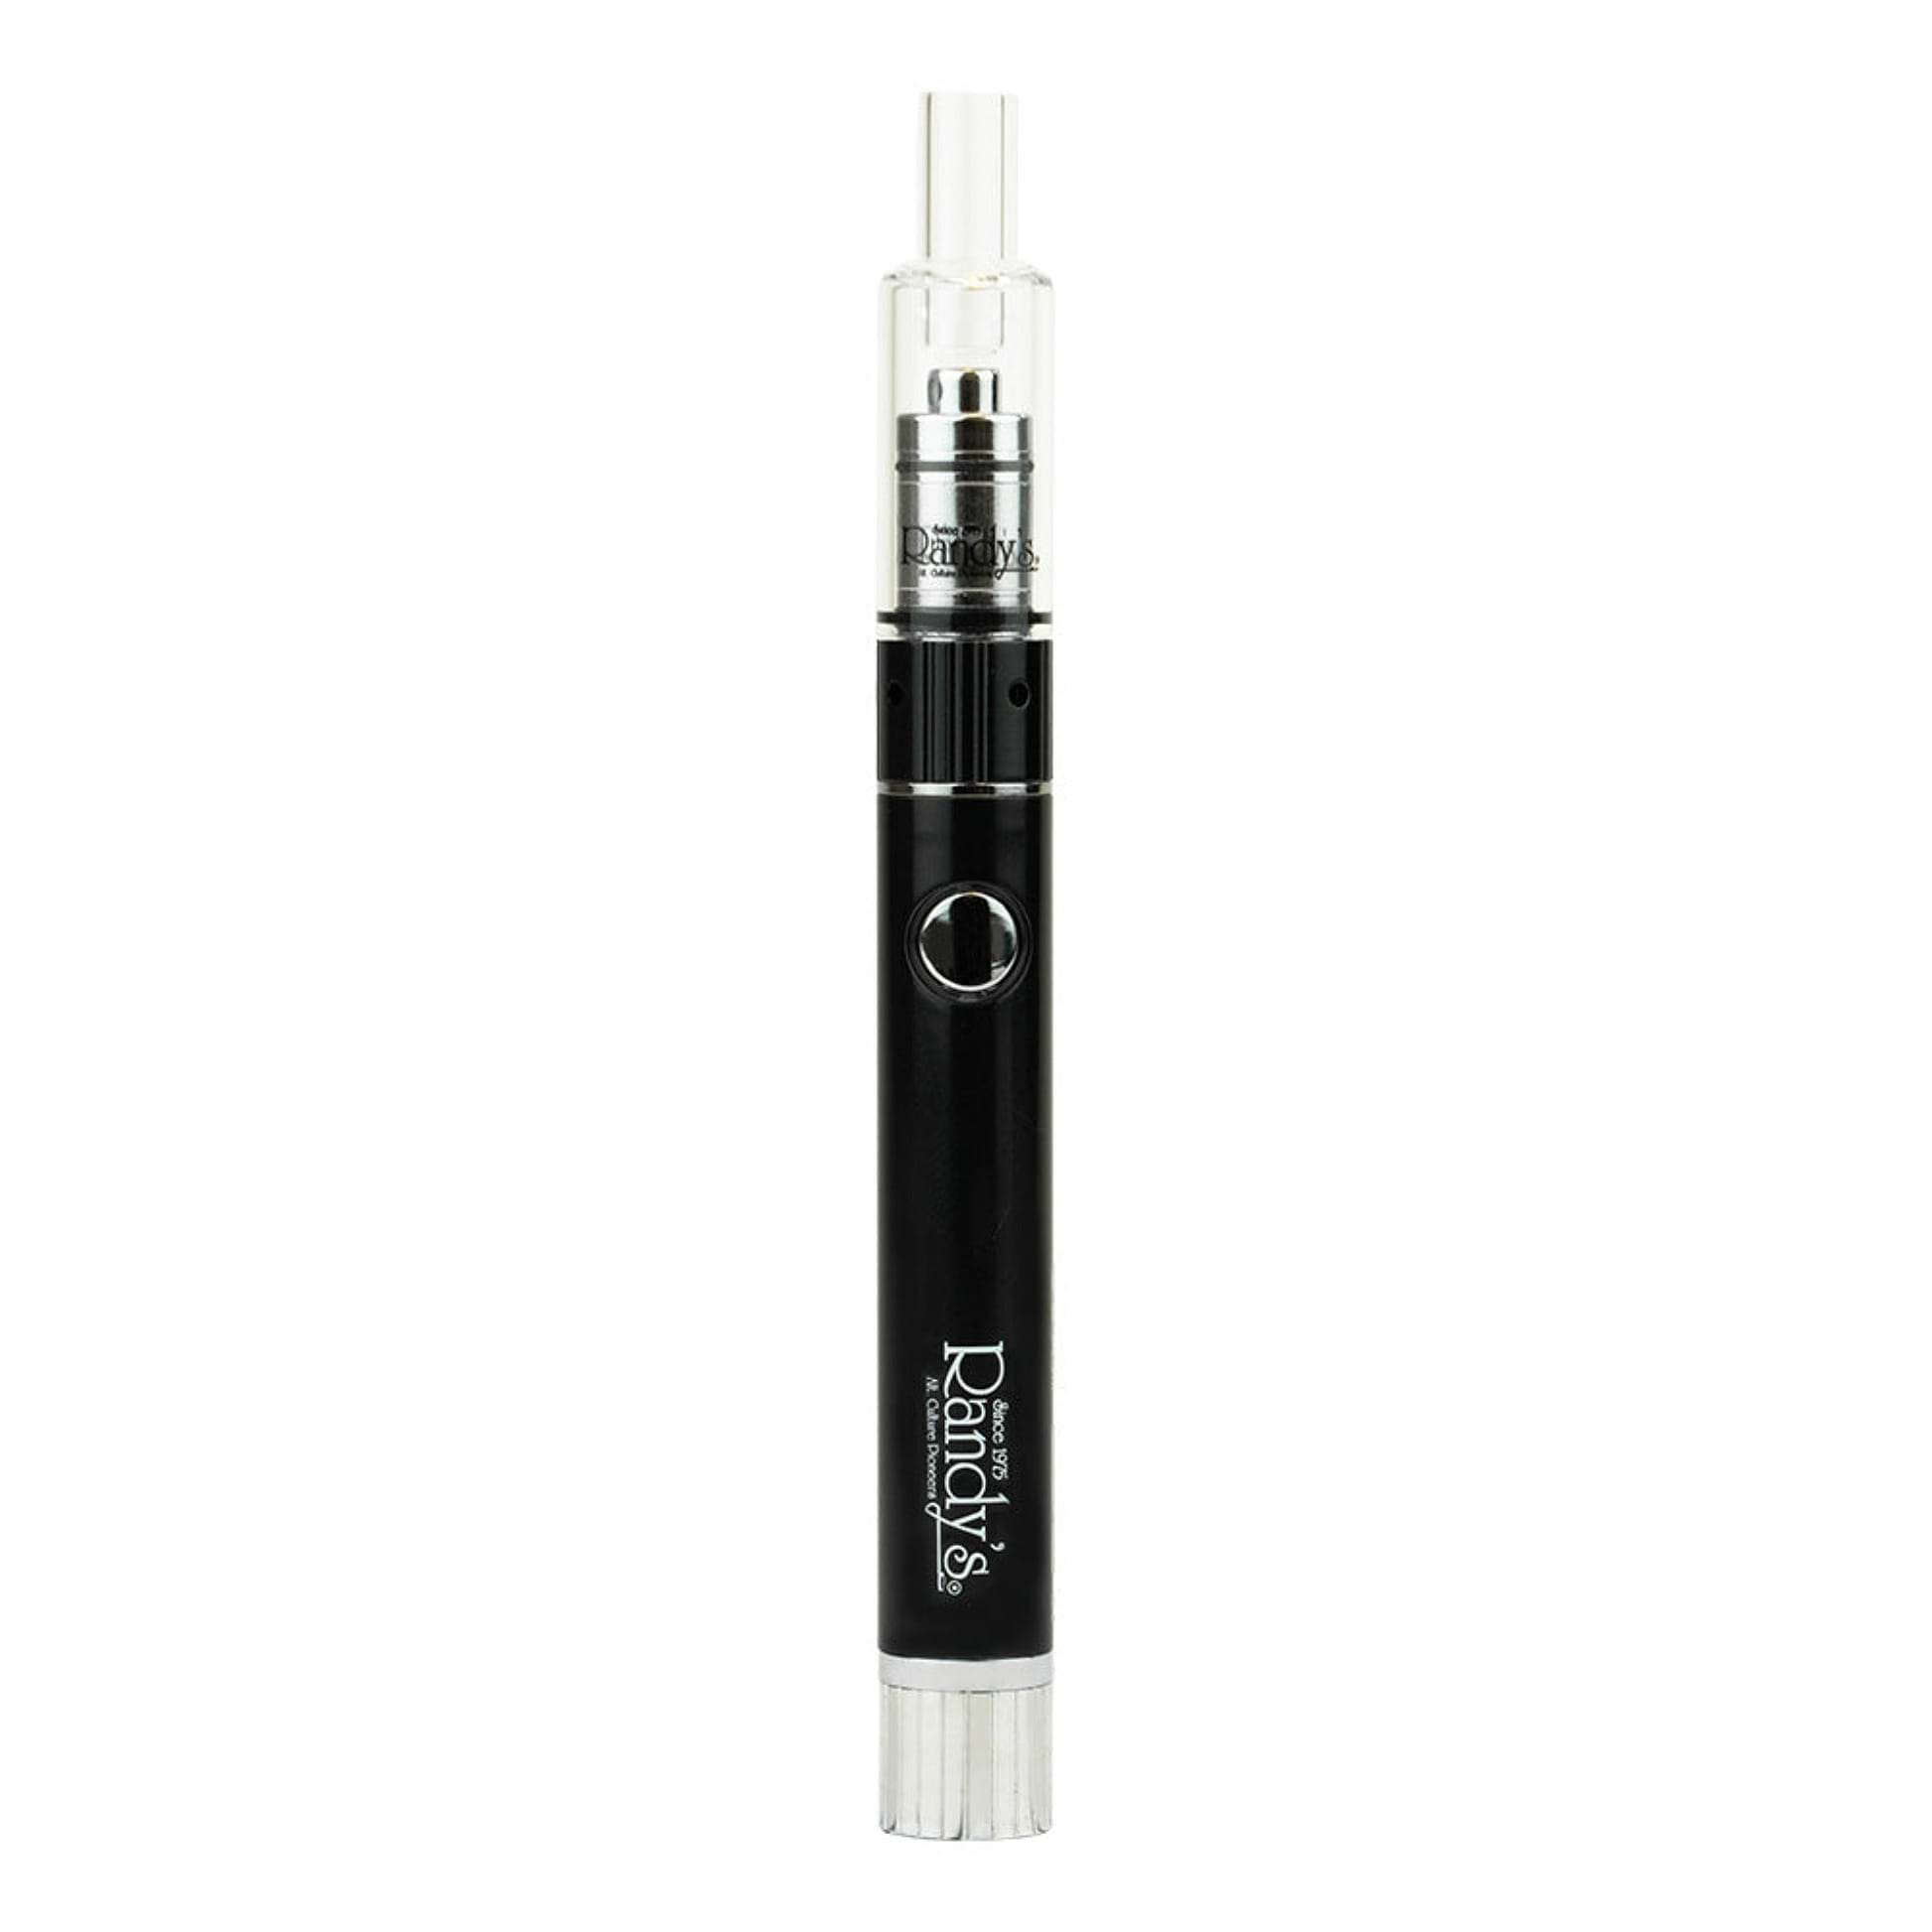 Randy's Glide 2.0 Concentrate Vape - 5.5in